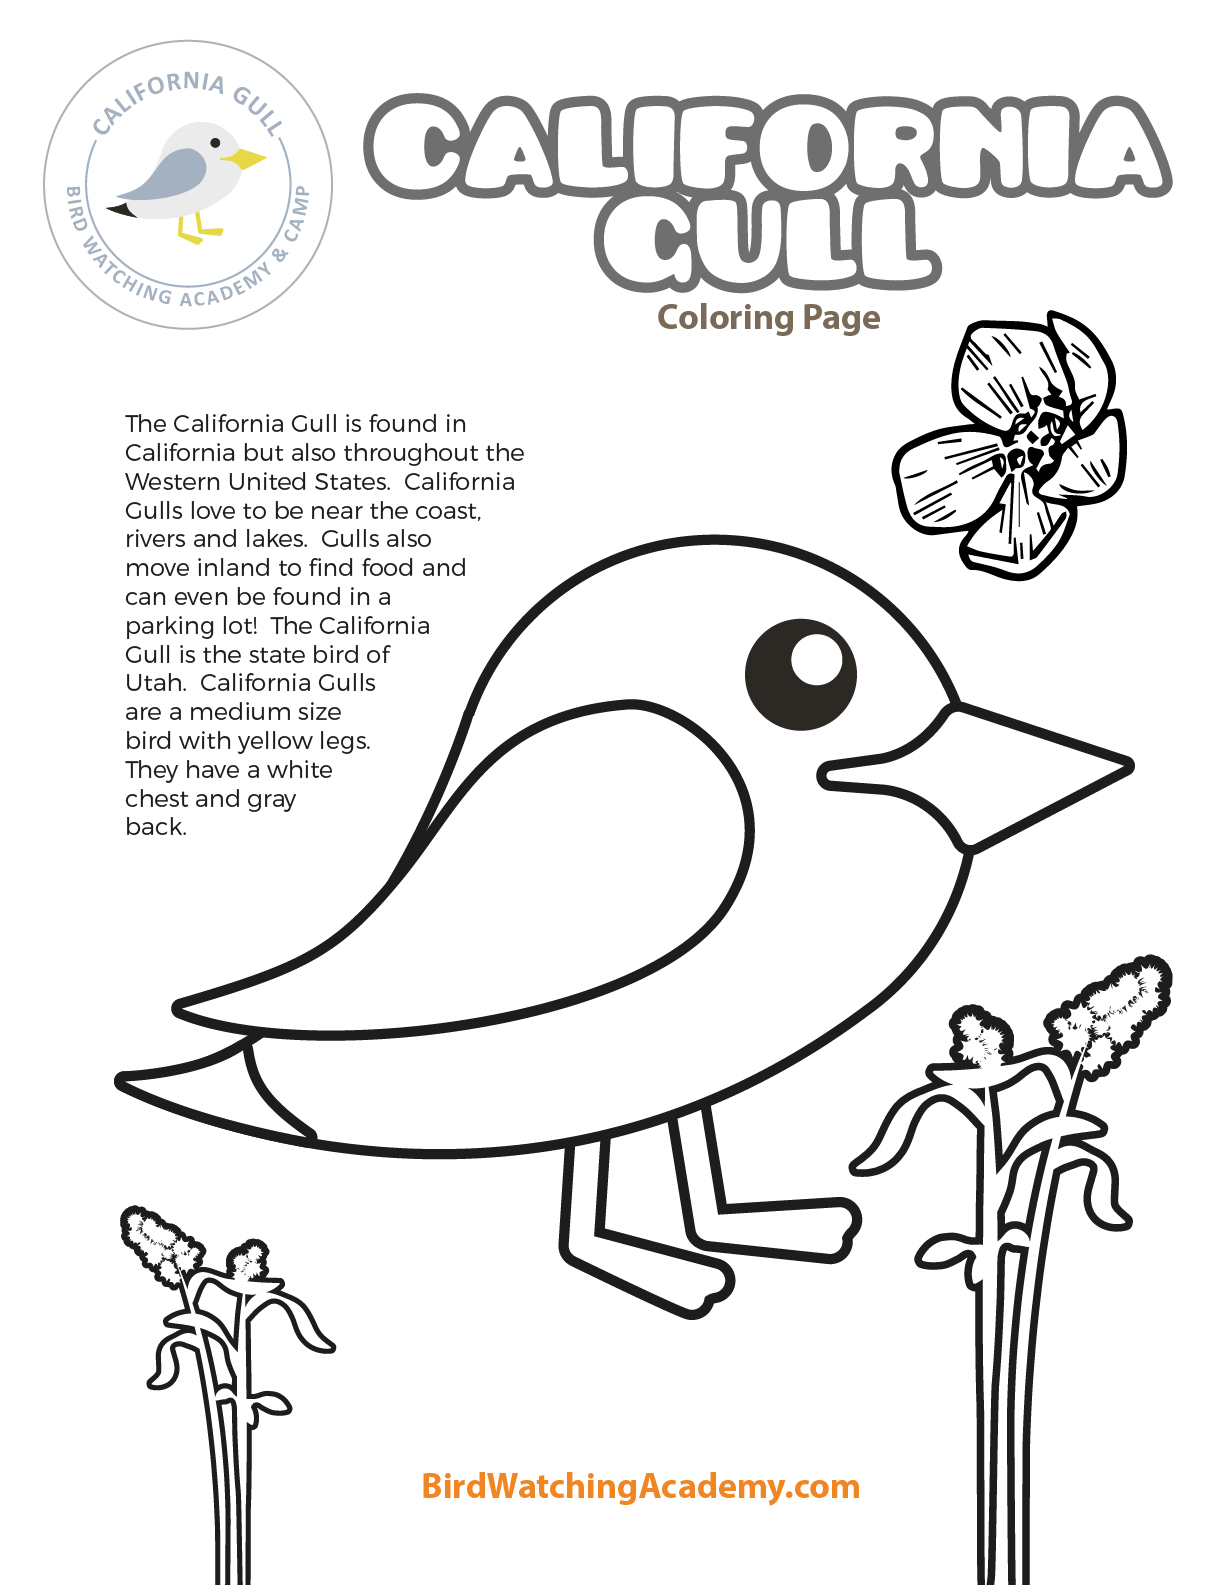 California gull coloring page